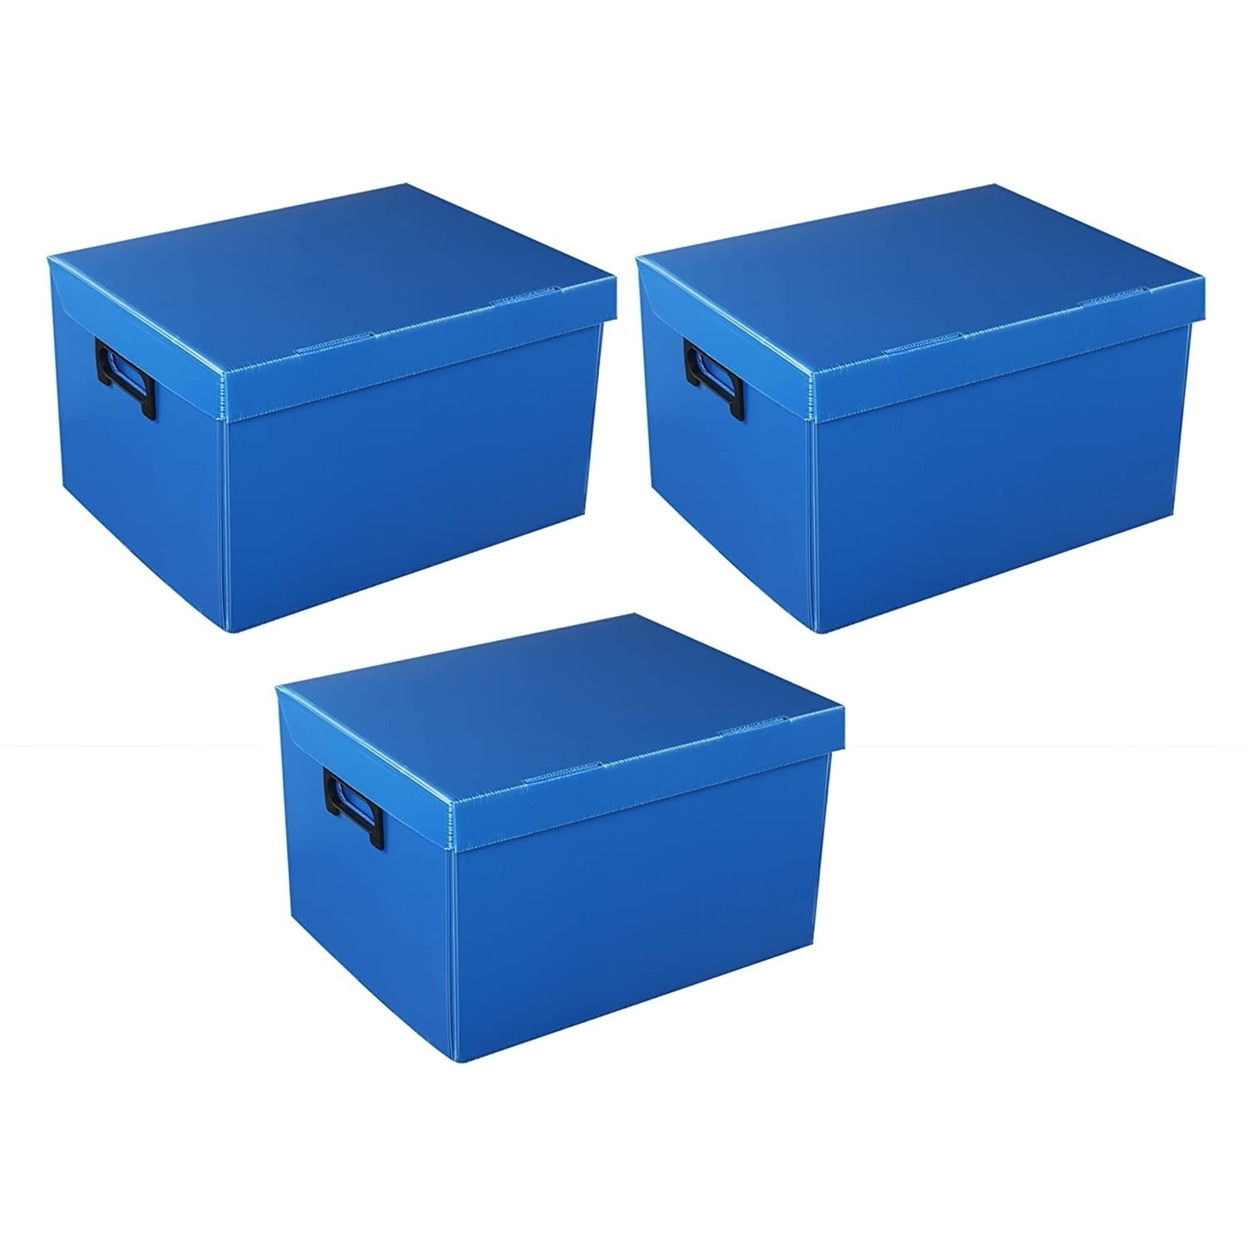 (3 Set) Vaiyer Durable Plastic Filing Storage Organizer Box with Lid, Storage Bins Baskets Containers for Home Office Cabinet for Office Use - blue